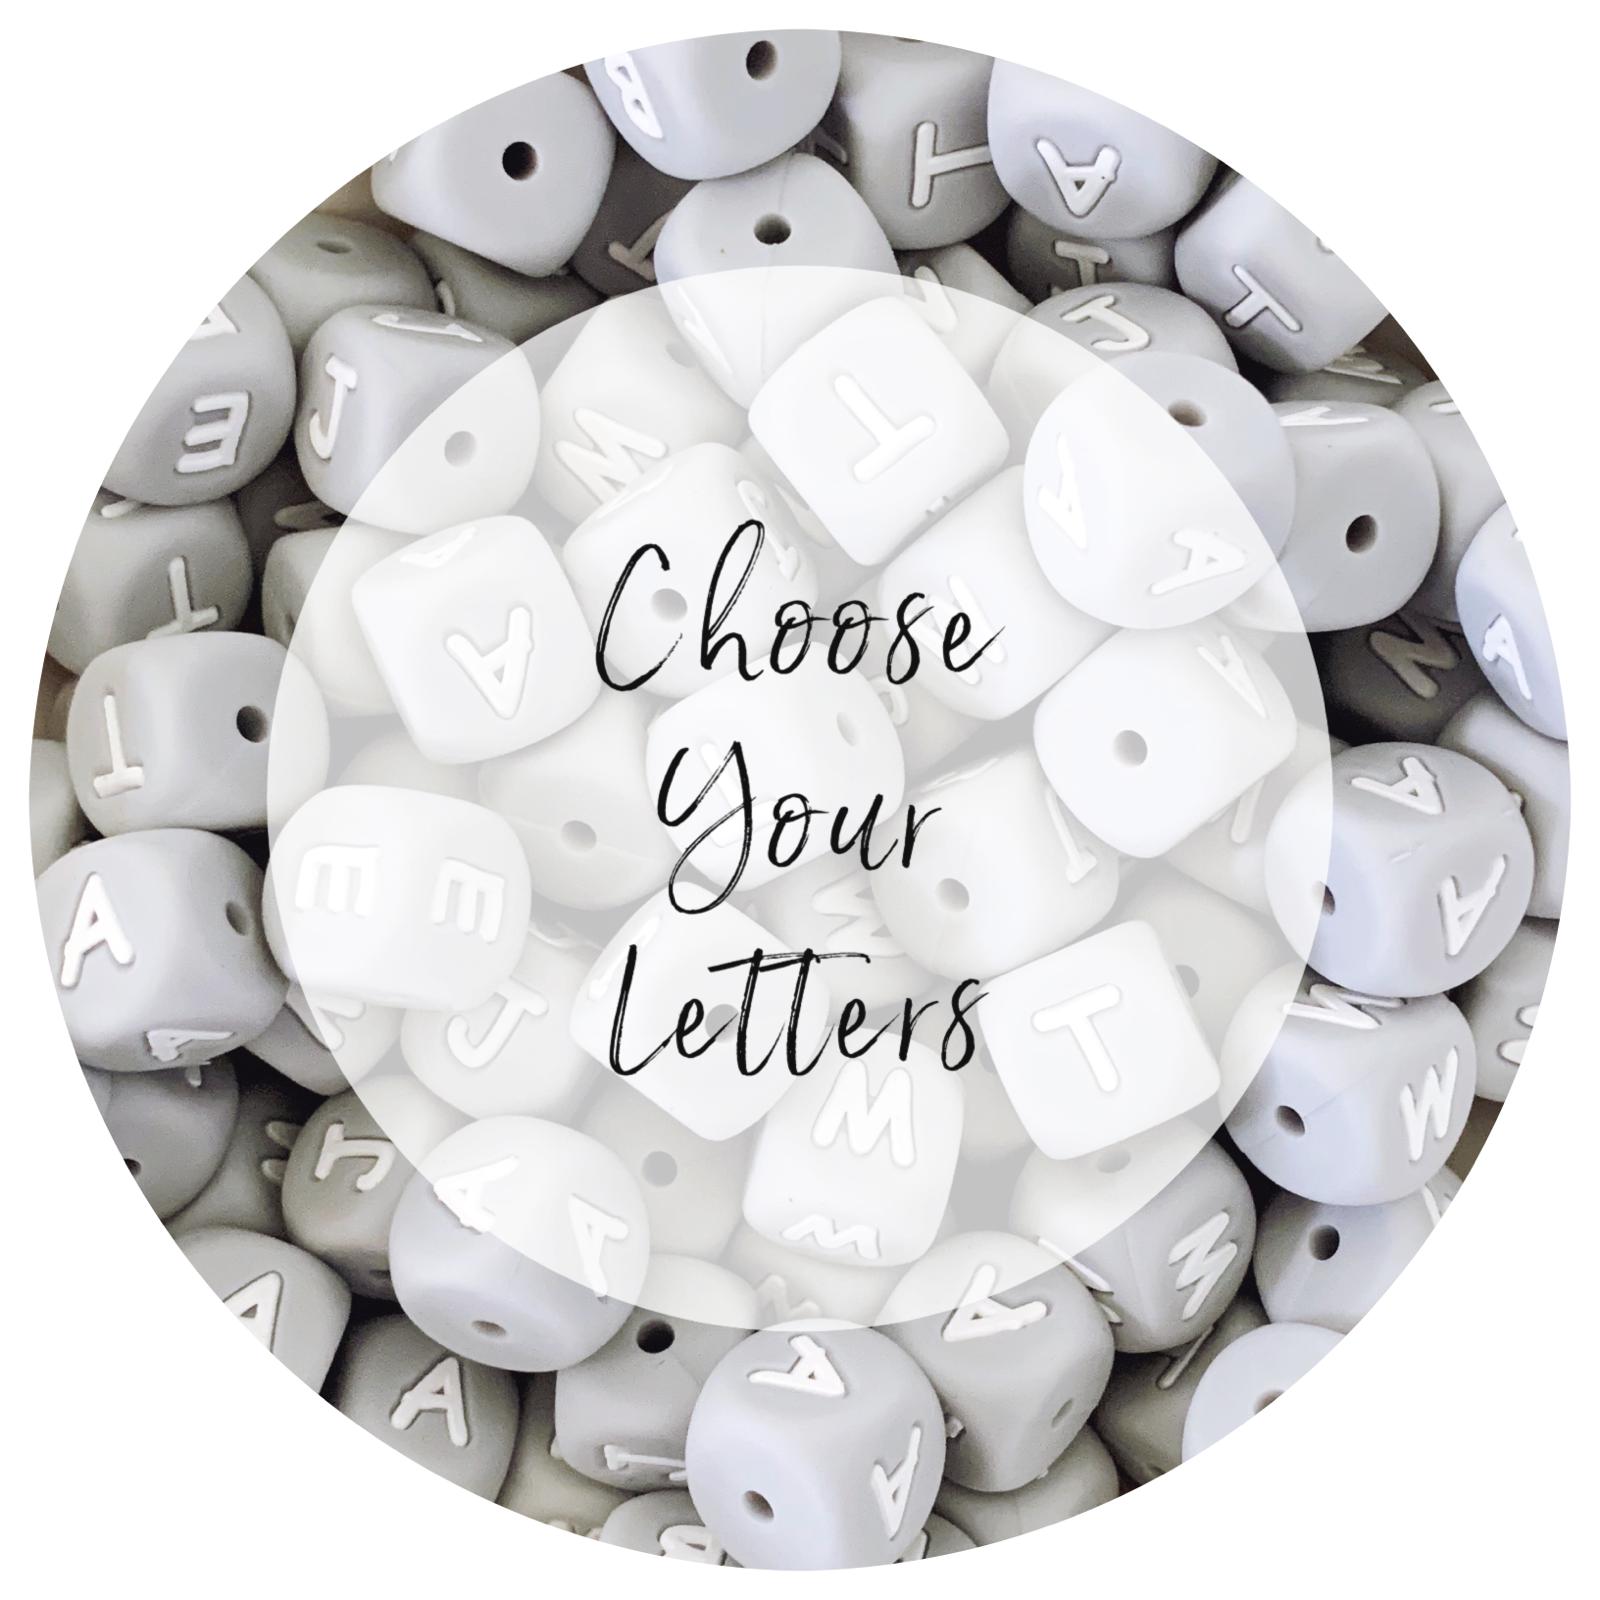 12mm Light Grey Silicone Letter Beads - Choose Your Letters - Each